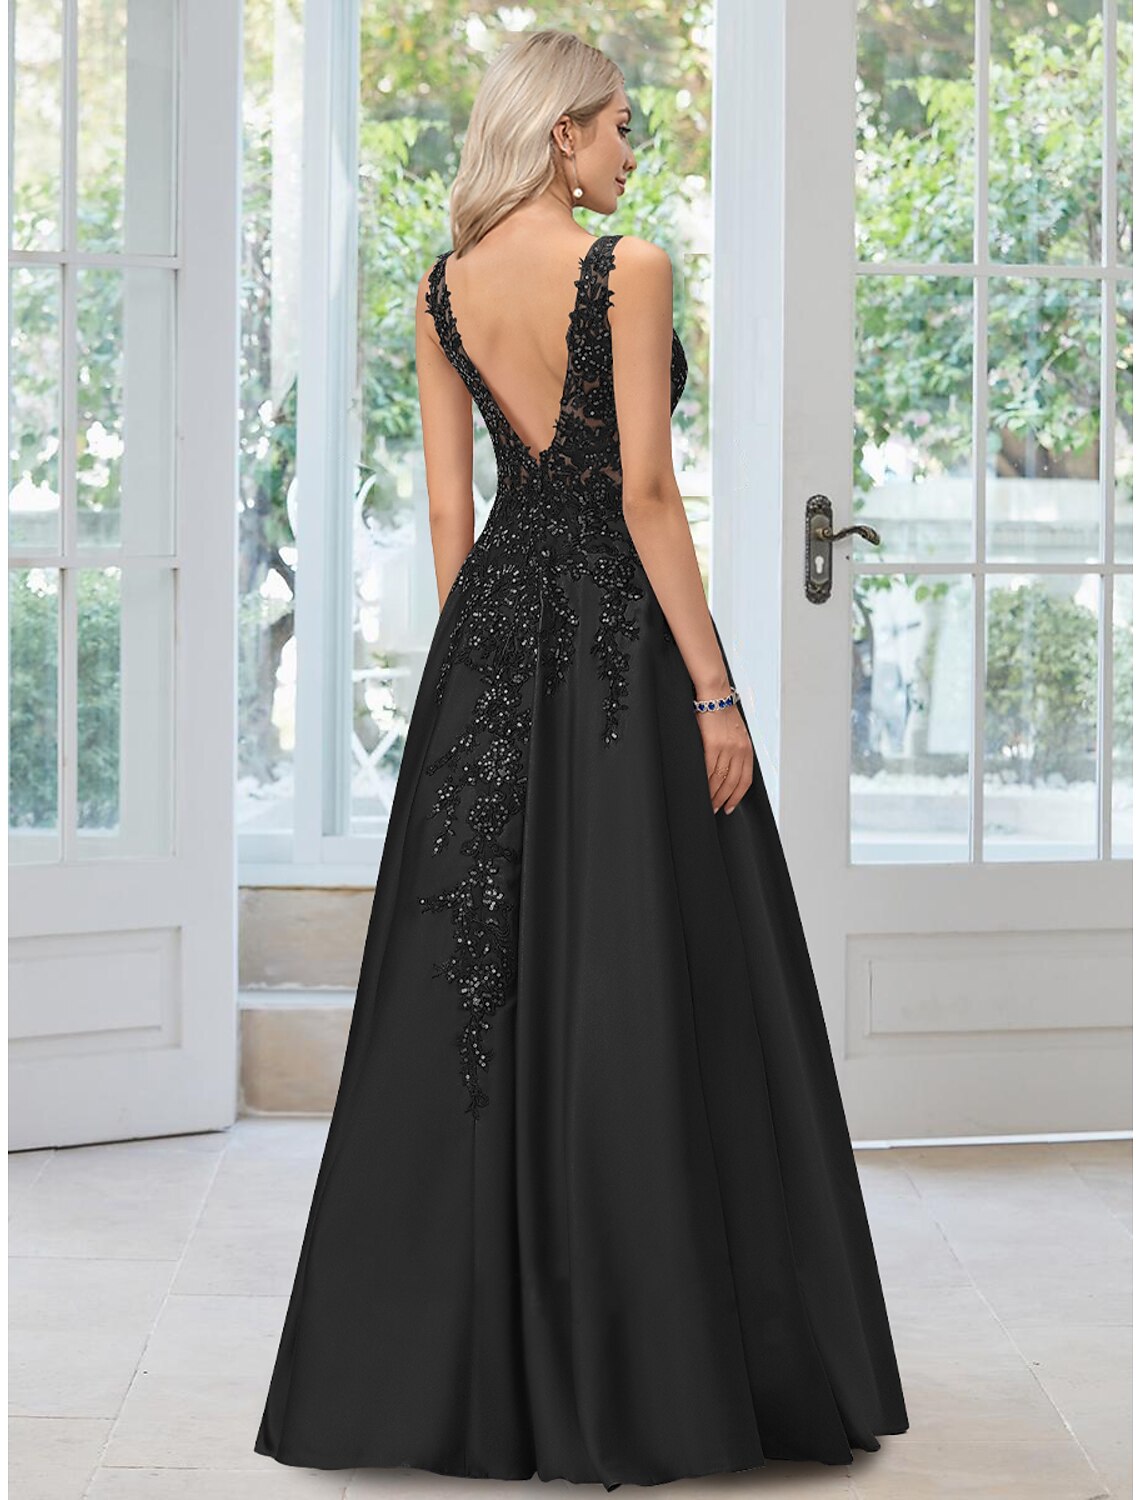 A-Line Evening Gown Black Dress Formal Floor Length Sleeveless V Neck Lace with Appliques